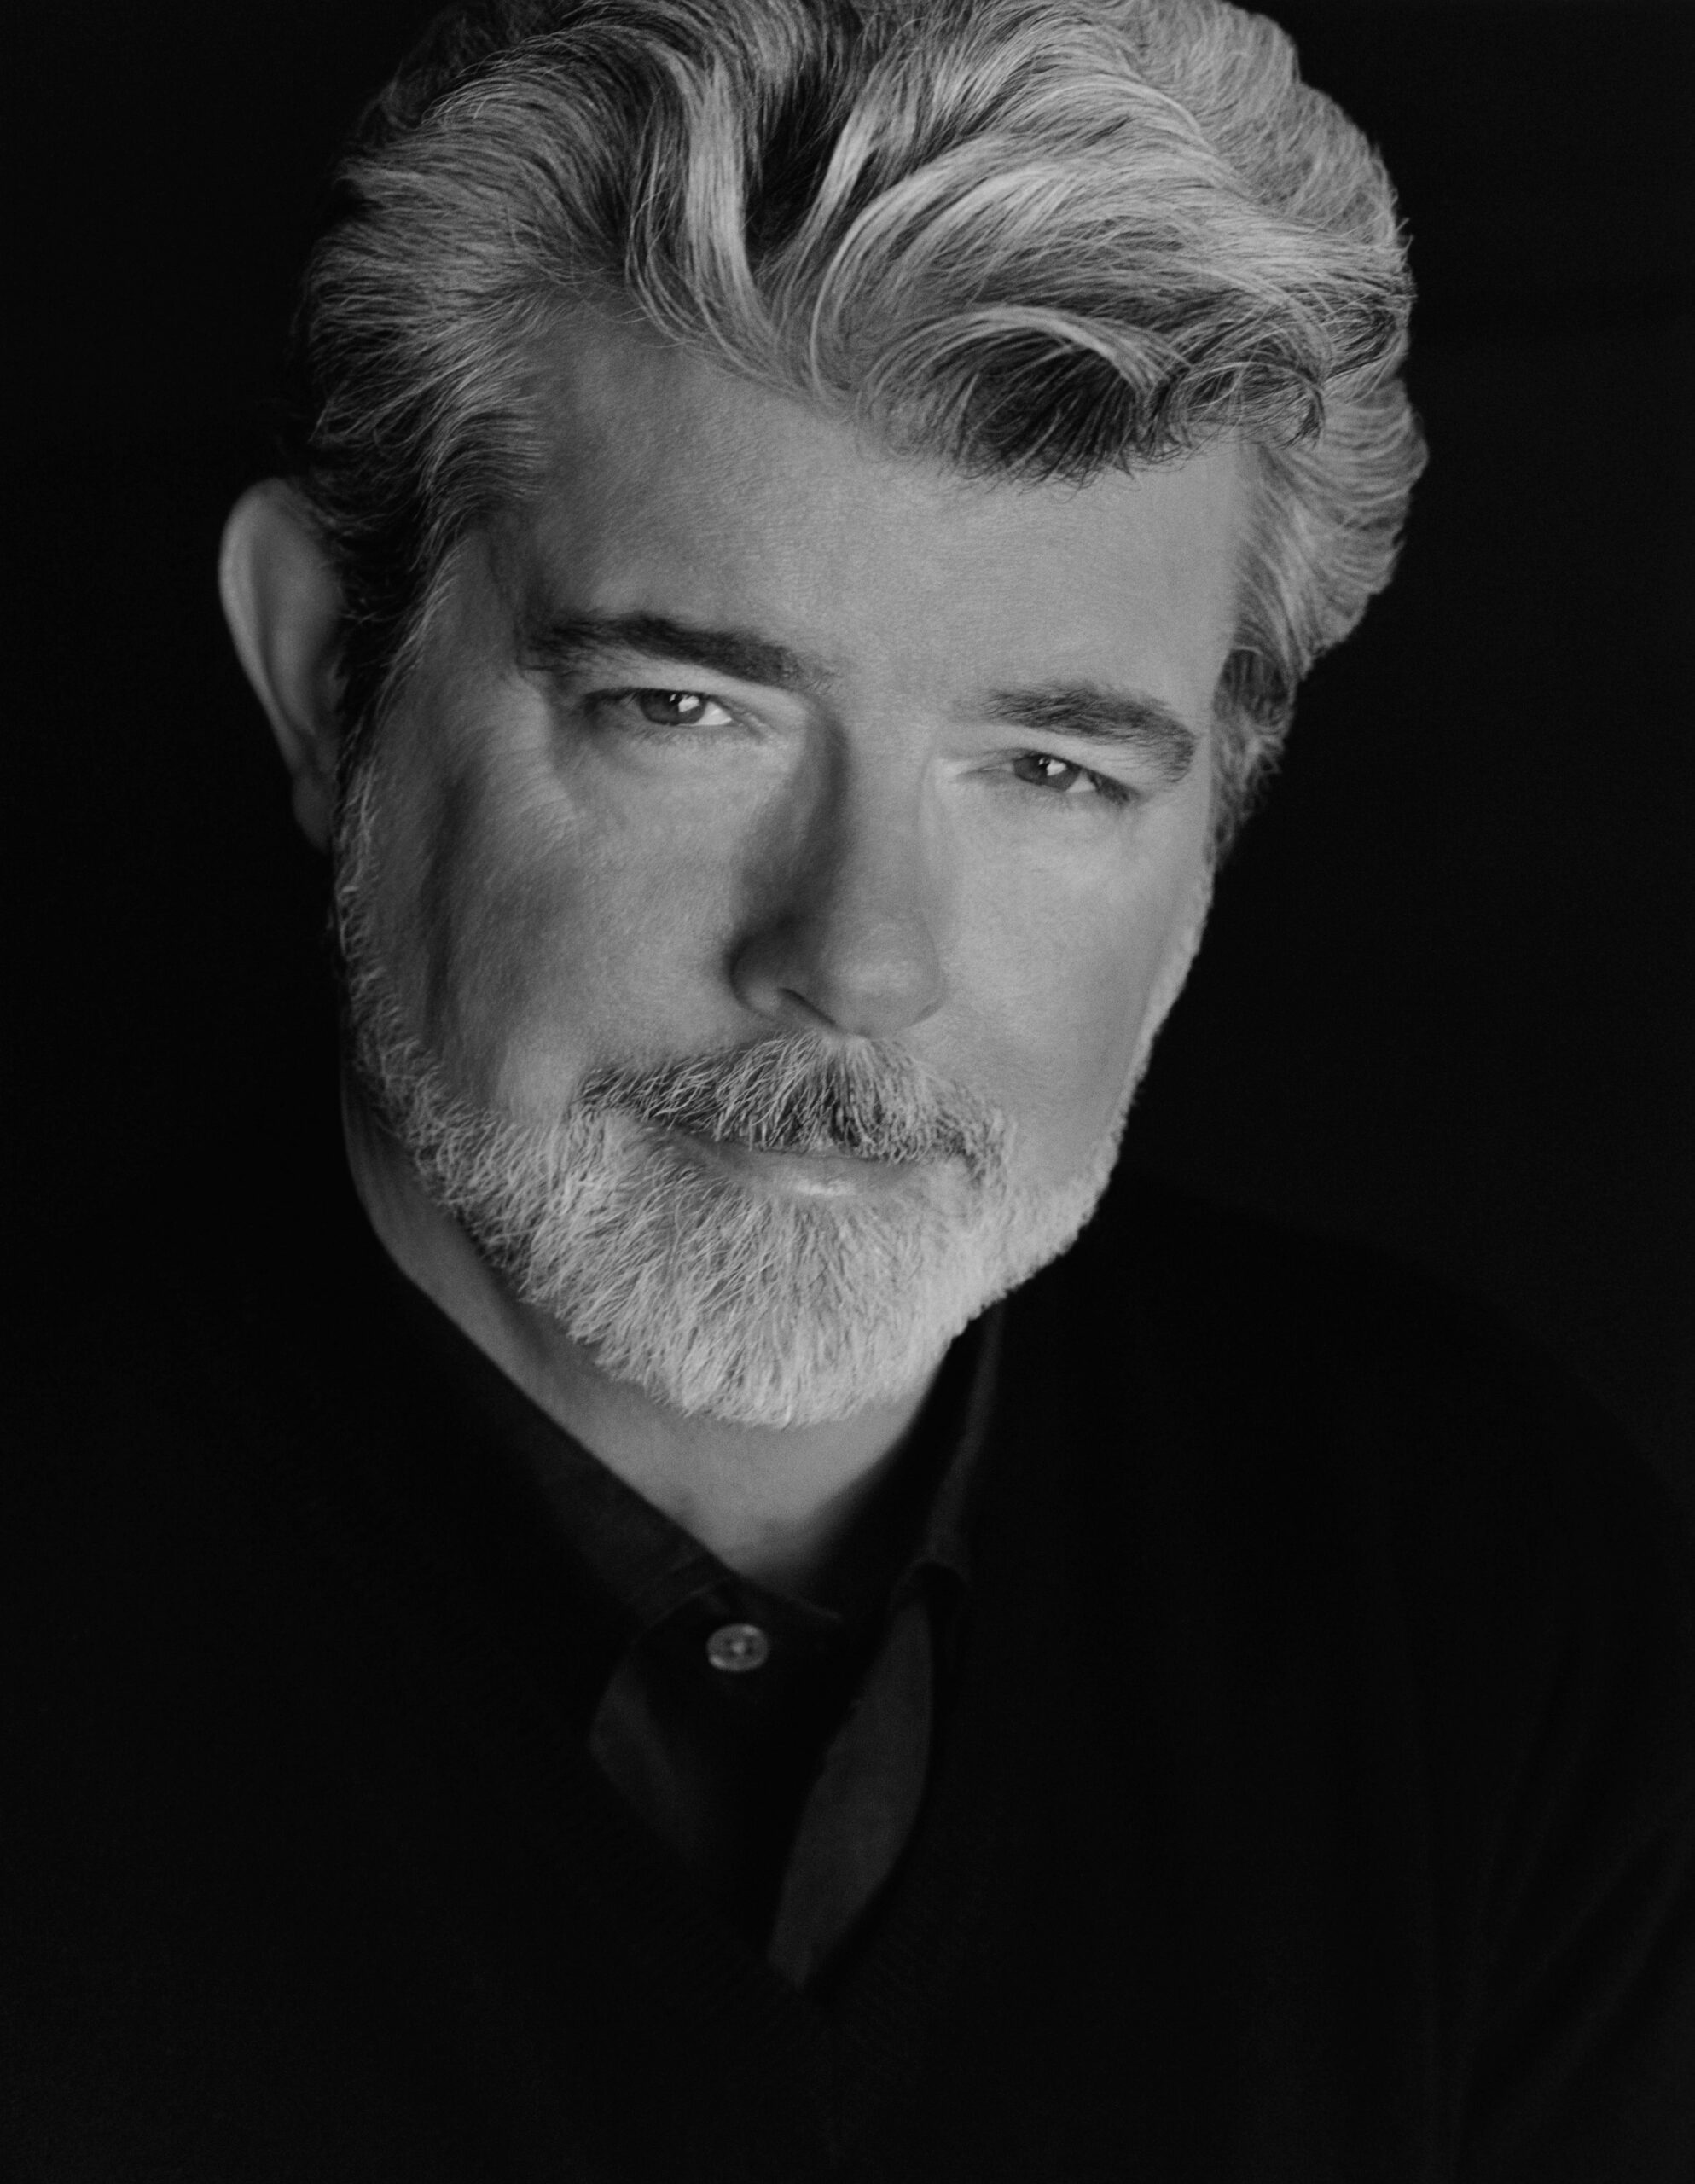 Headshot of George Lucas with a serious expression.